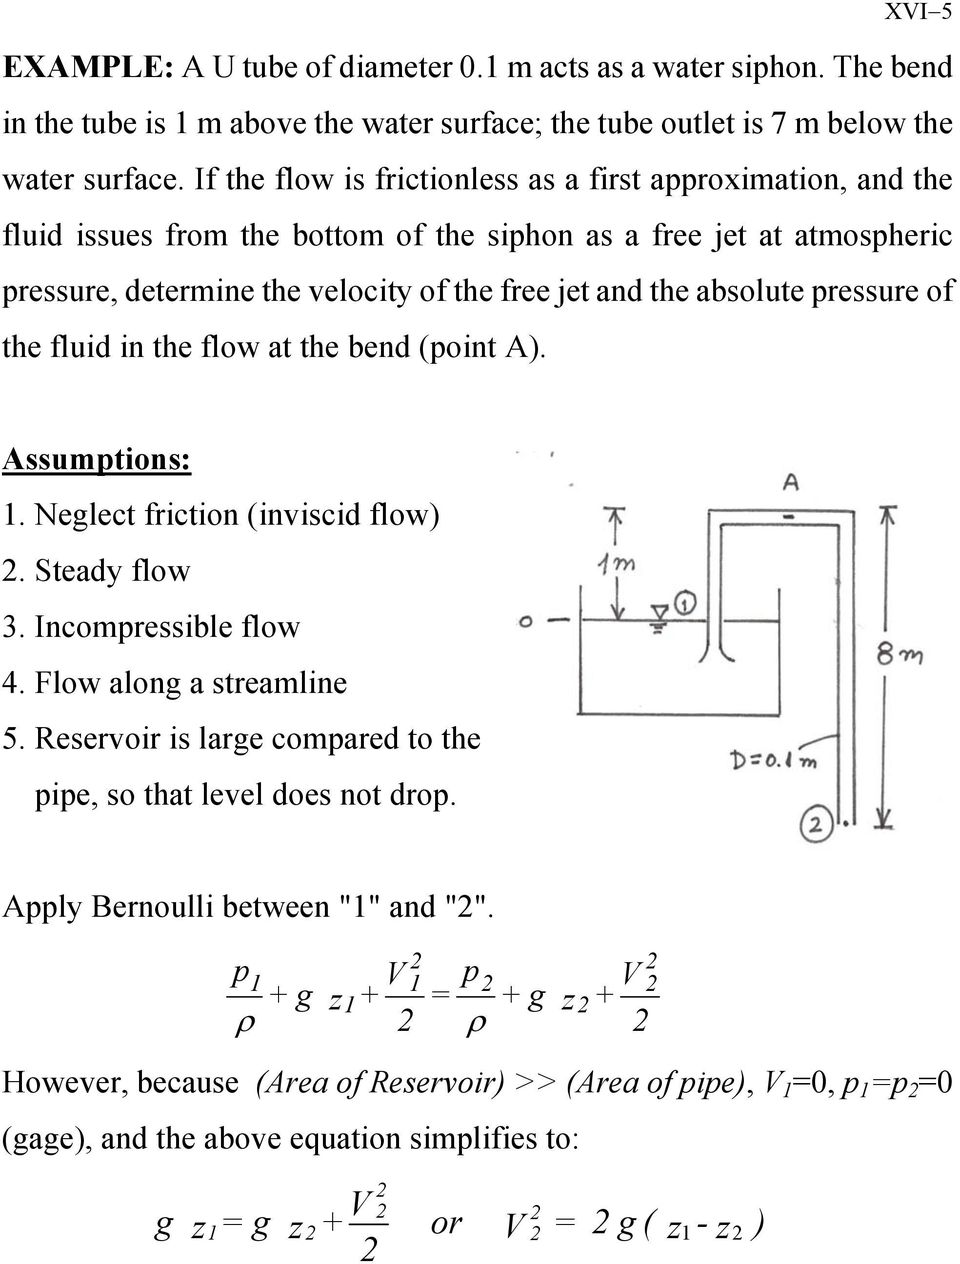 absolute ressure of the fluid in the flow at the bend (oint A). Assumtions:. Neglect friction (inviscid flow). Steady flow. Incomressible flow 4. Flow along a streamline 5.